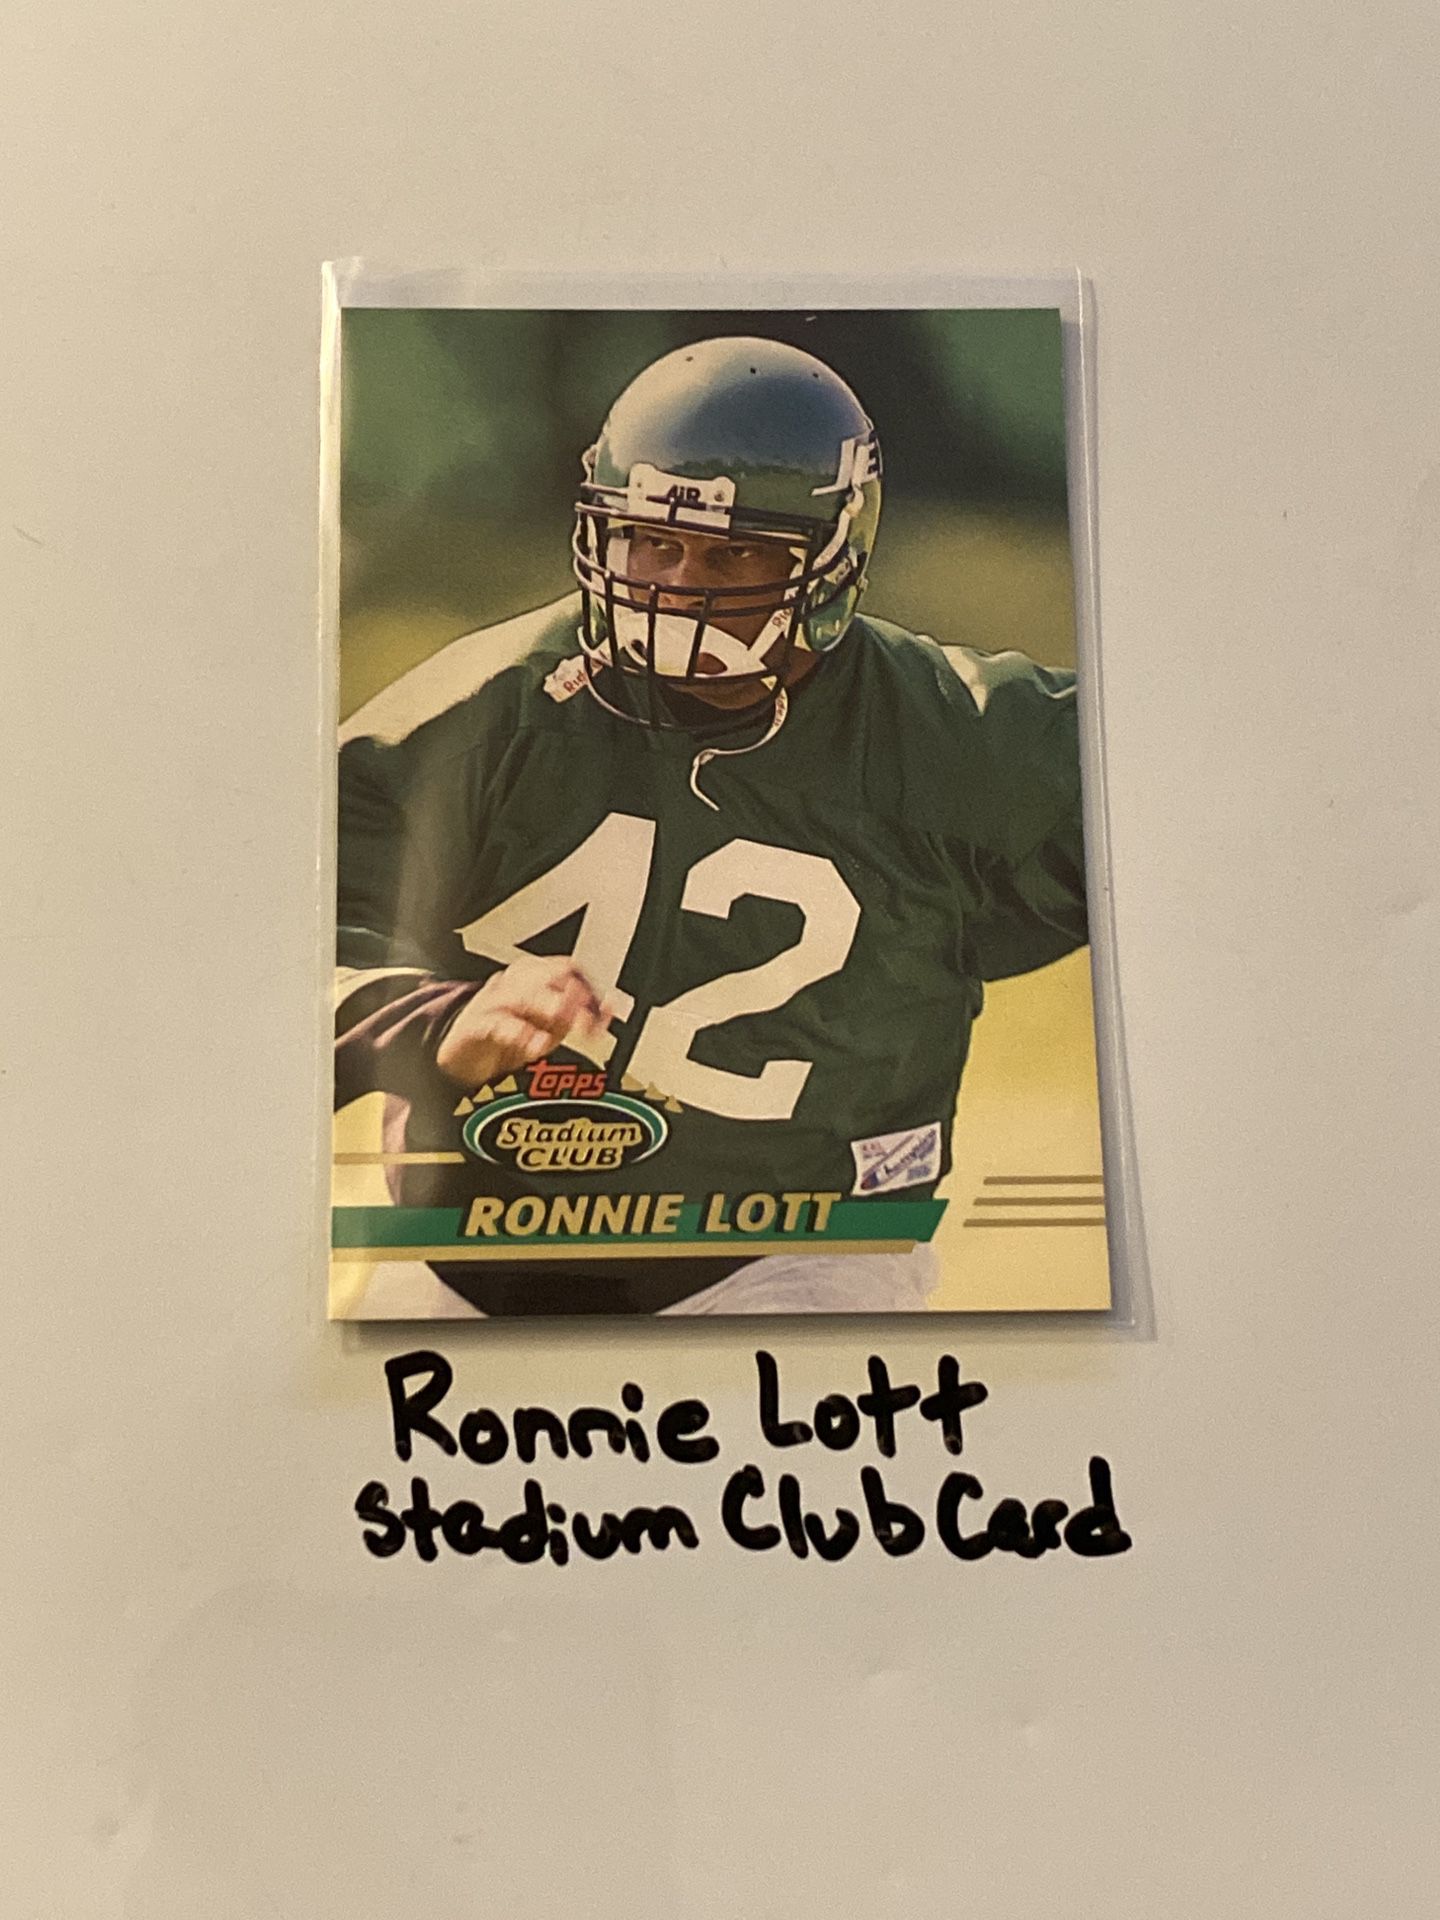 Ronnie Lott New York Jets Hall of Fame Safety Stadium Club Card. 